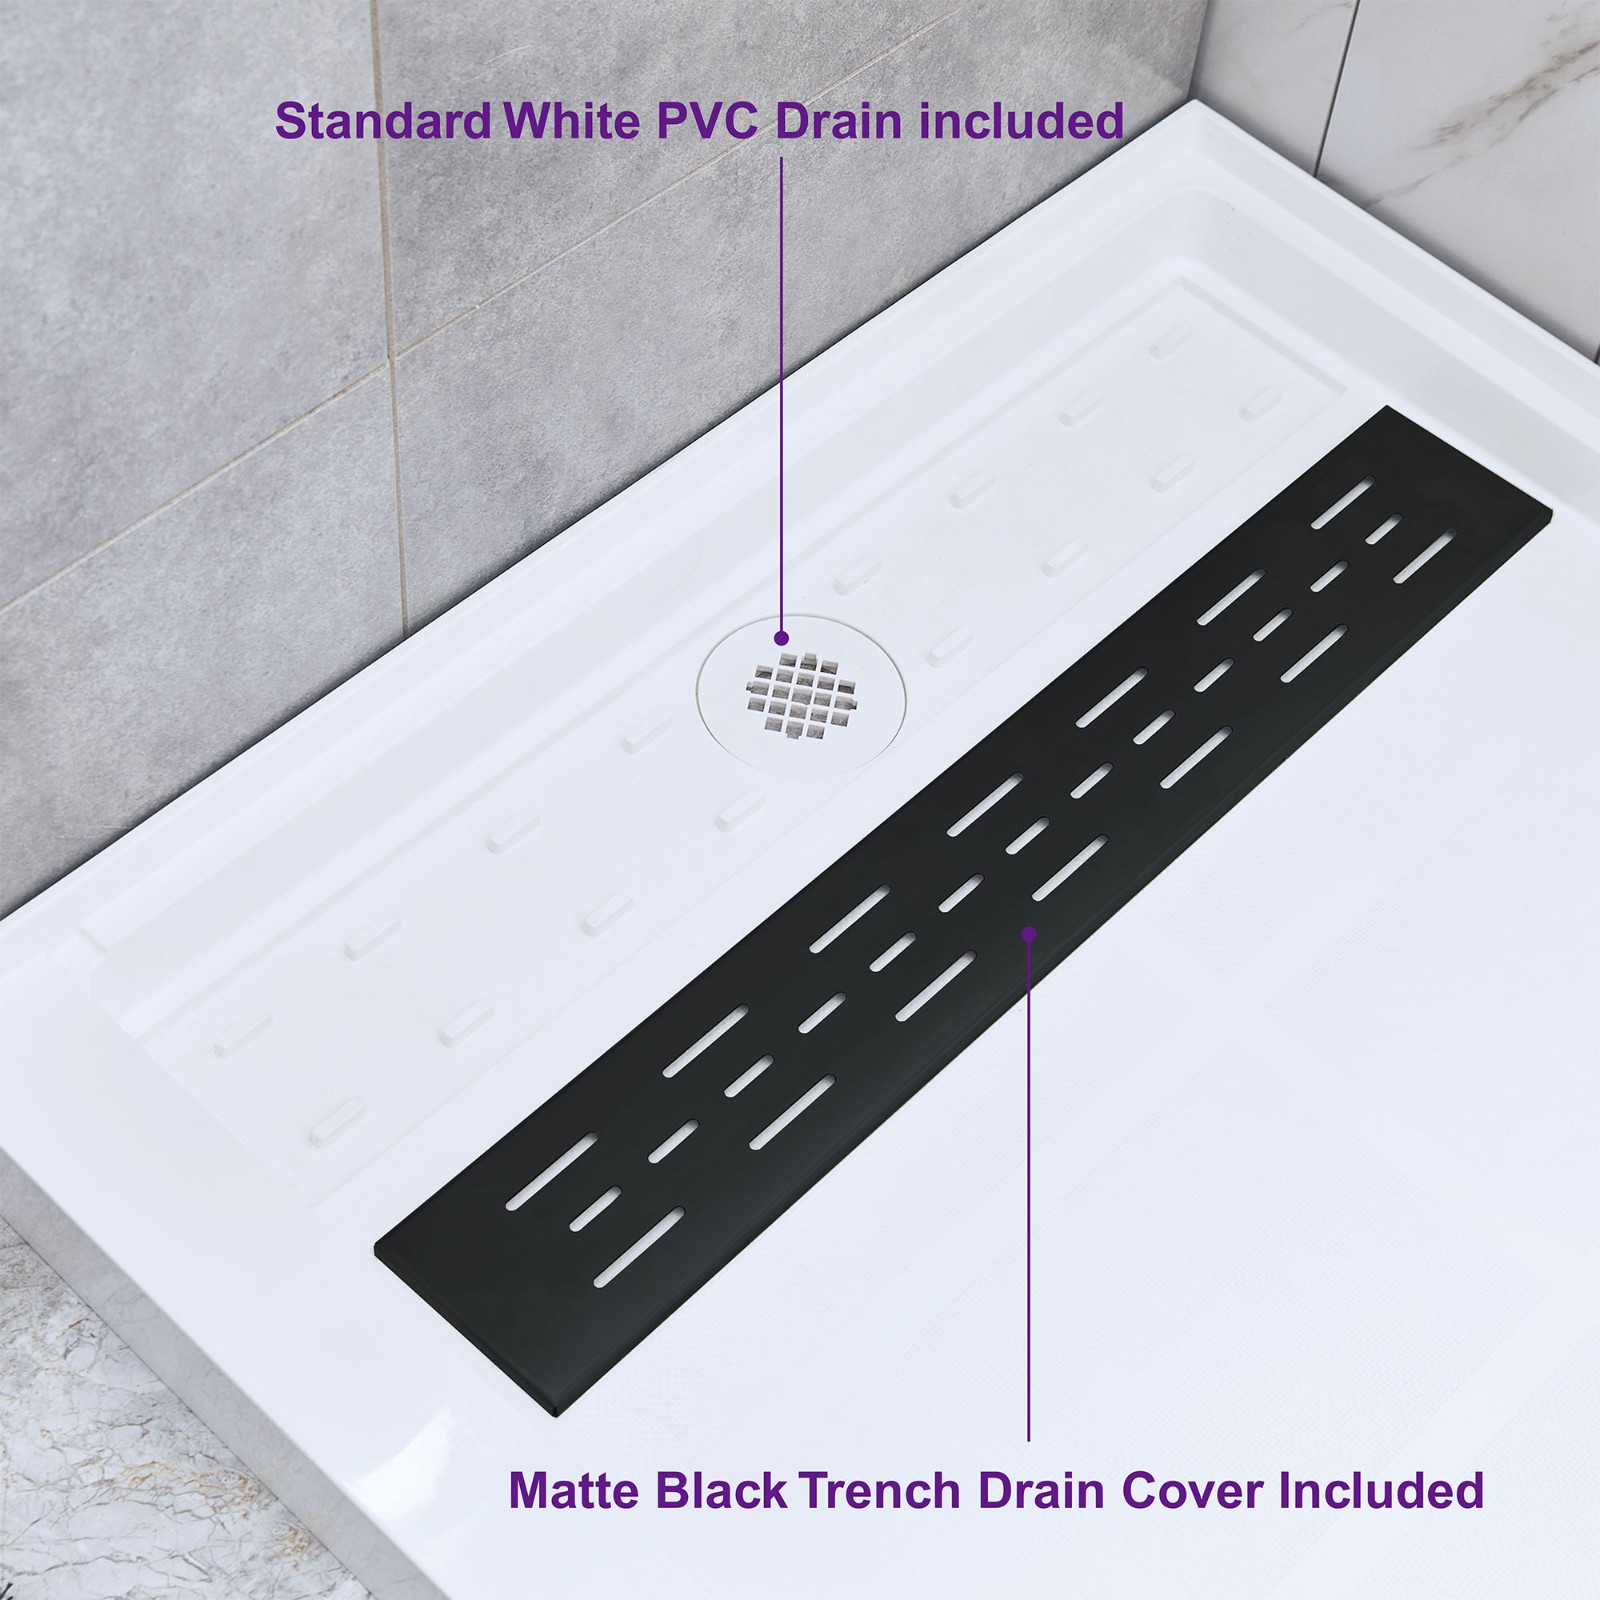  WOODBRIDGE SBR6034-1000L-MB SolidSurface Shower Base with Recessed Trench Side Including Matte Black Linear Cover, 60